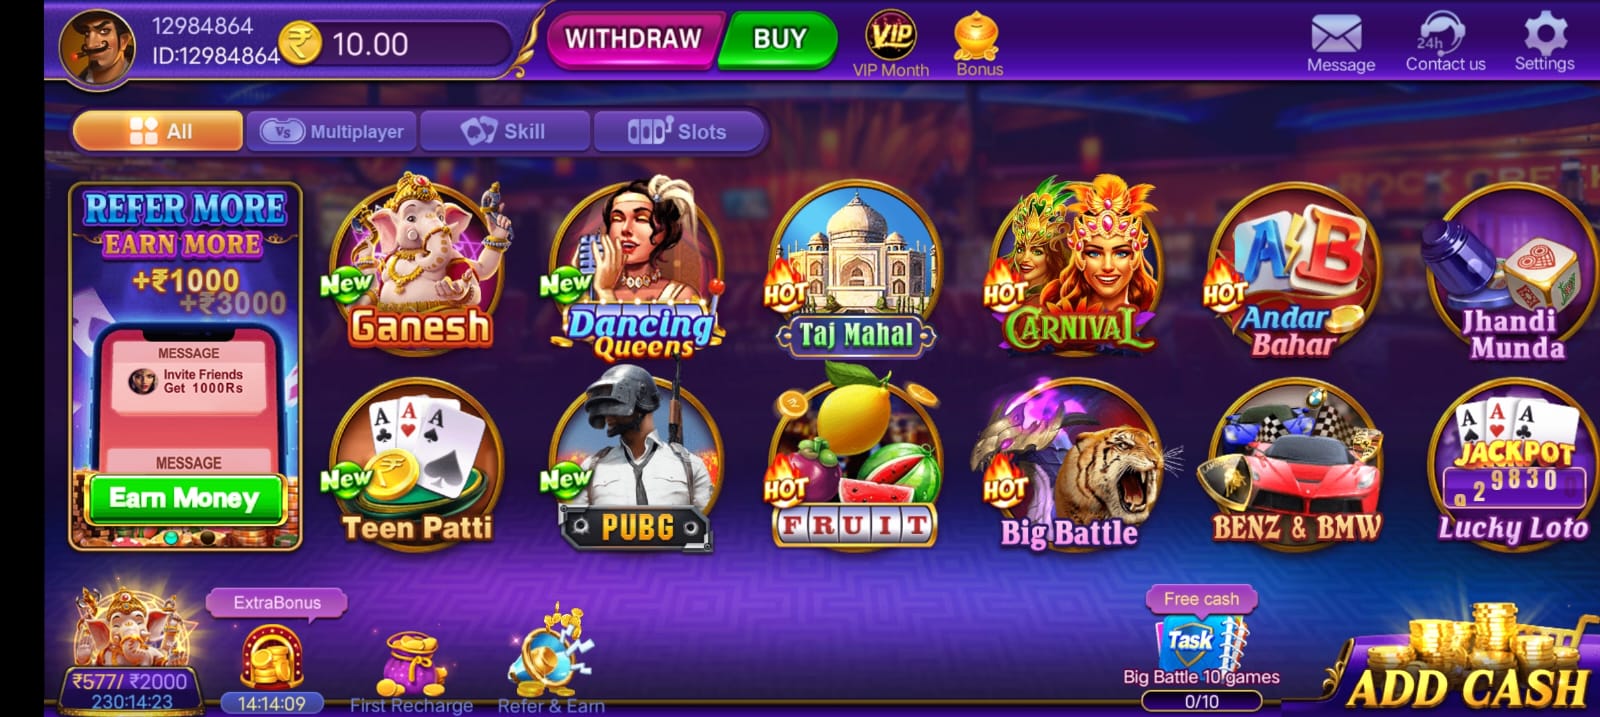 Available Games on Royal Slots App